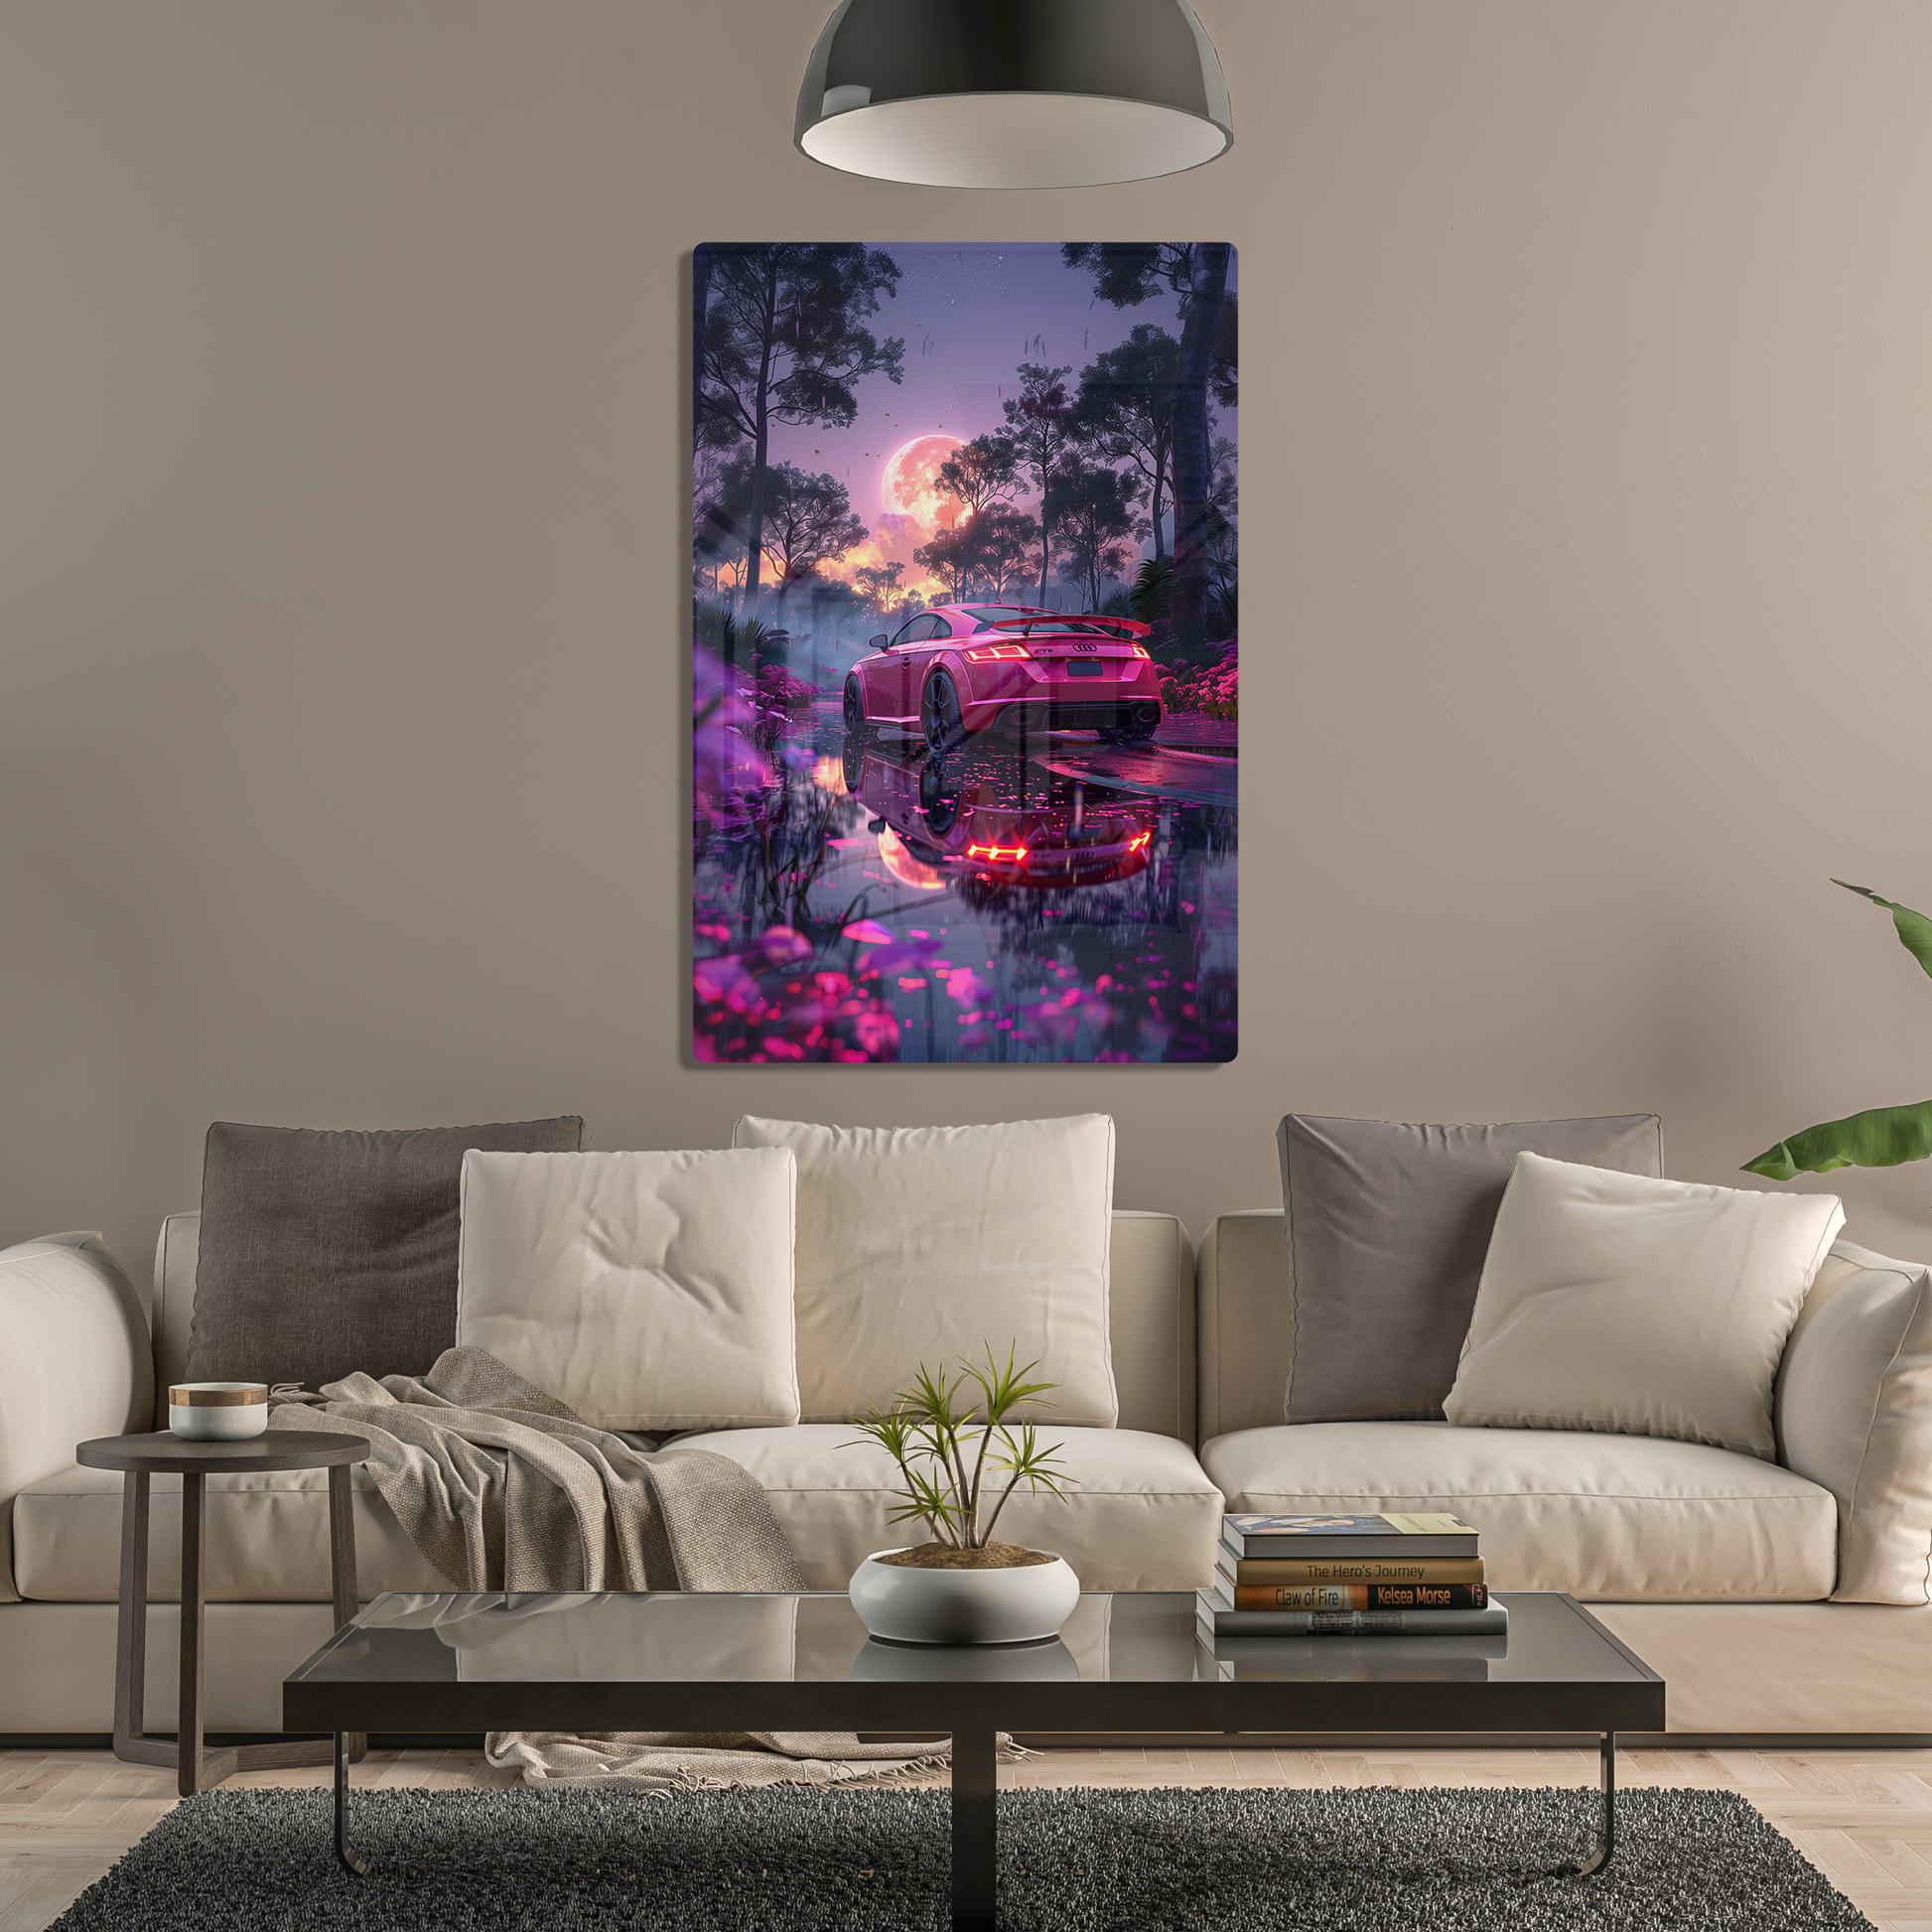 Moonlit Majesty (Acrylic)Step into the universe with 'Moonlit Majesty' on canvas from RimaGallery. Experience the cosmos in your home with vibrant, ethically crafted art. Free shipping in thRimaGallery